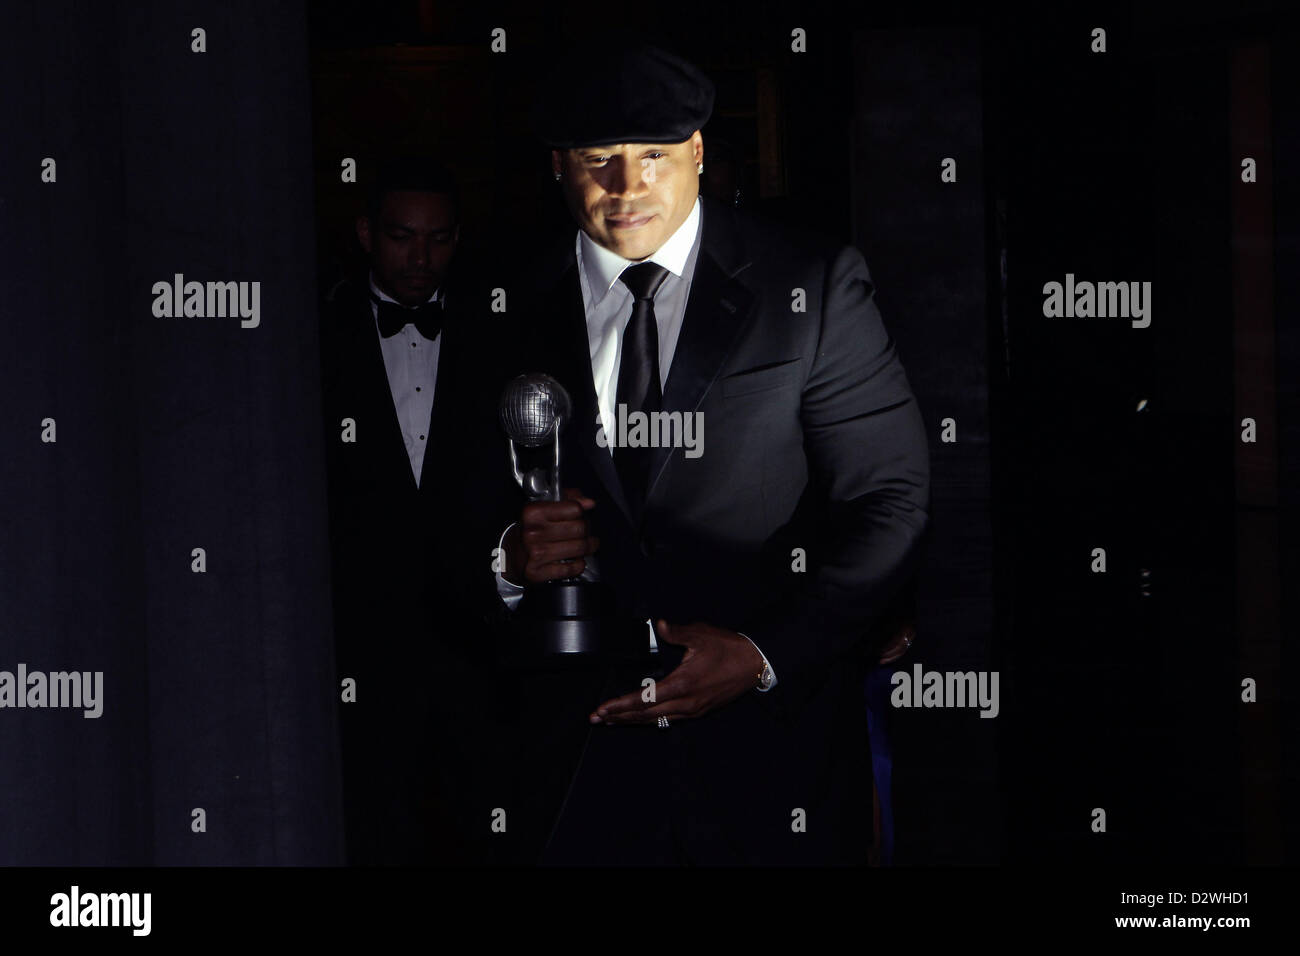 Feb. 1, 2013 - Los Angeles, California, U.S. - LL COOL J is honored as outstanding actor in a drama series for CBS' 'NCIS: Los Angeles' during the 44th NAACP Image Awards at The Shrine Auditorium. (Credit Image: © TLeopold/Globe Photos/ZUMAPRESS.com) Stock Photo